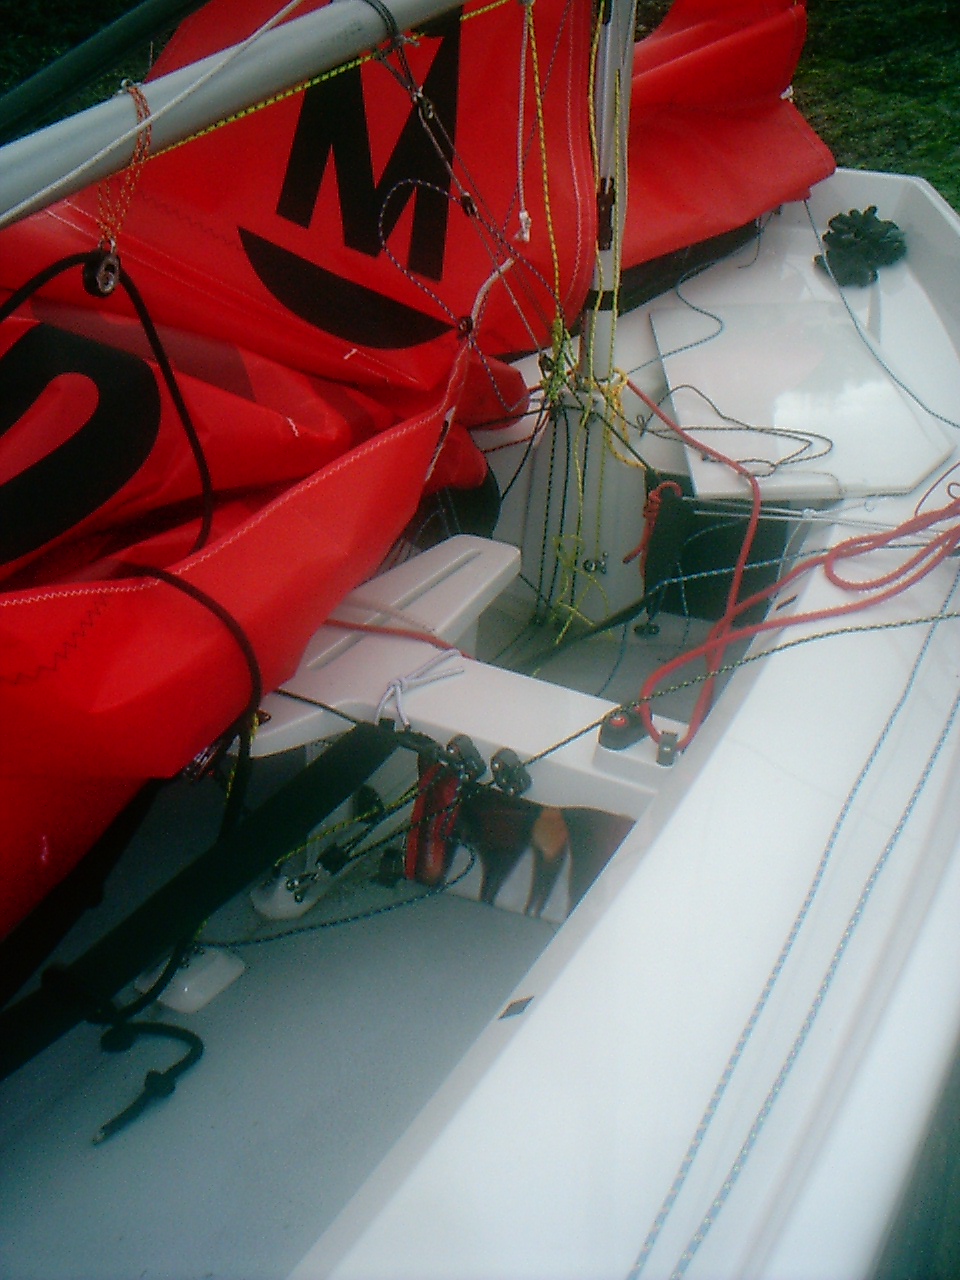 Duplicated mainsail controls (kicker, downhaul) on the thwart of a Winder Mirror dinghy 